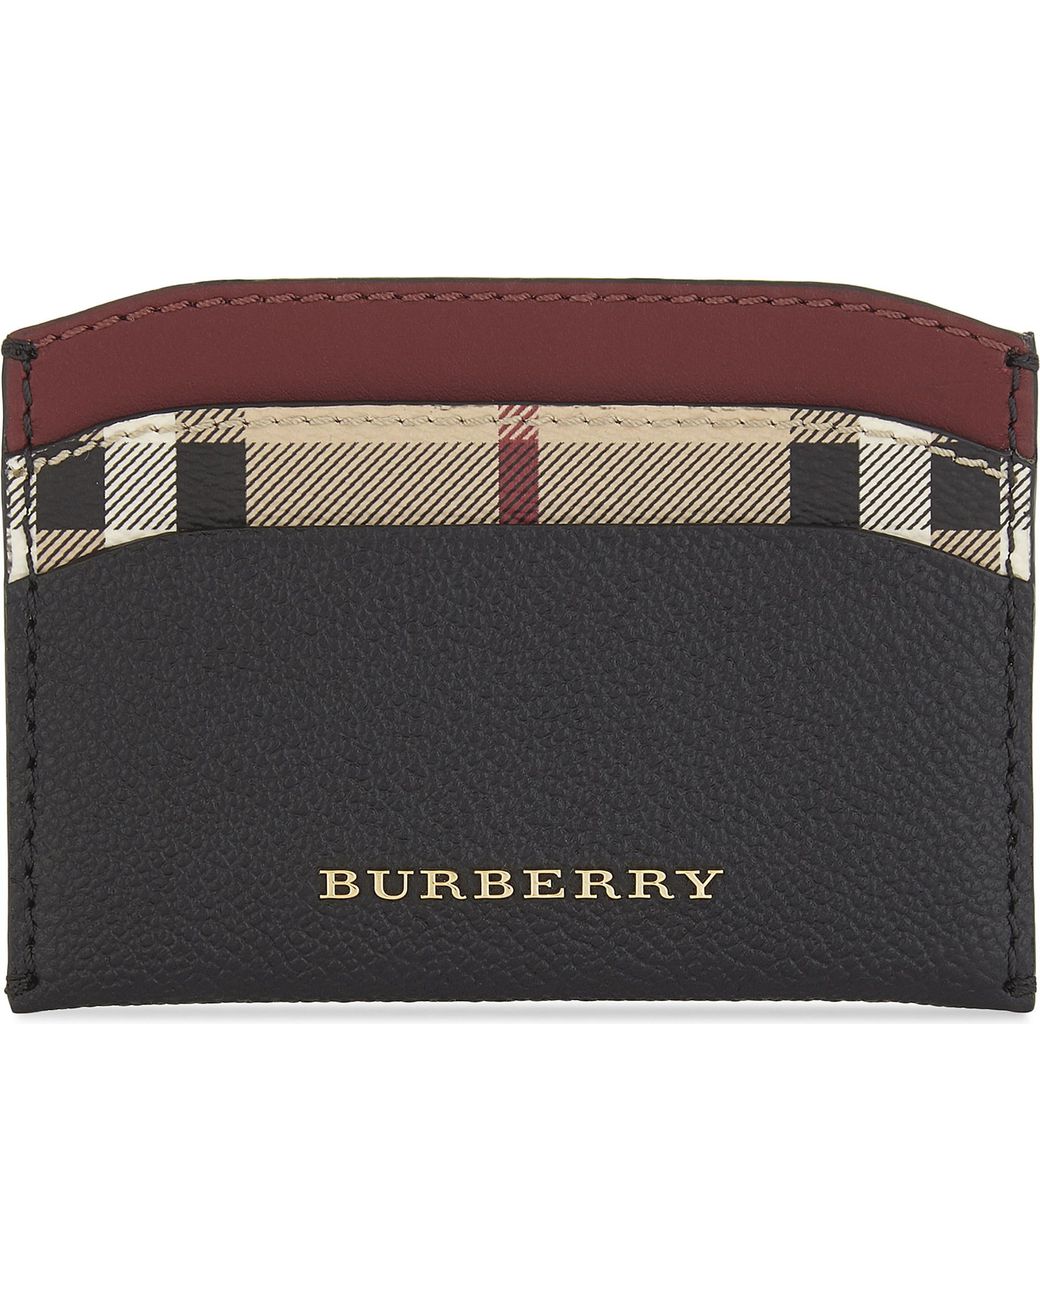 Burberry Sandon Credit Card Holder In Canvas Check And Leather Black Wallet  $200